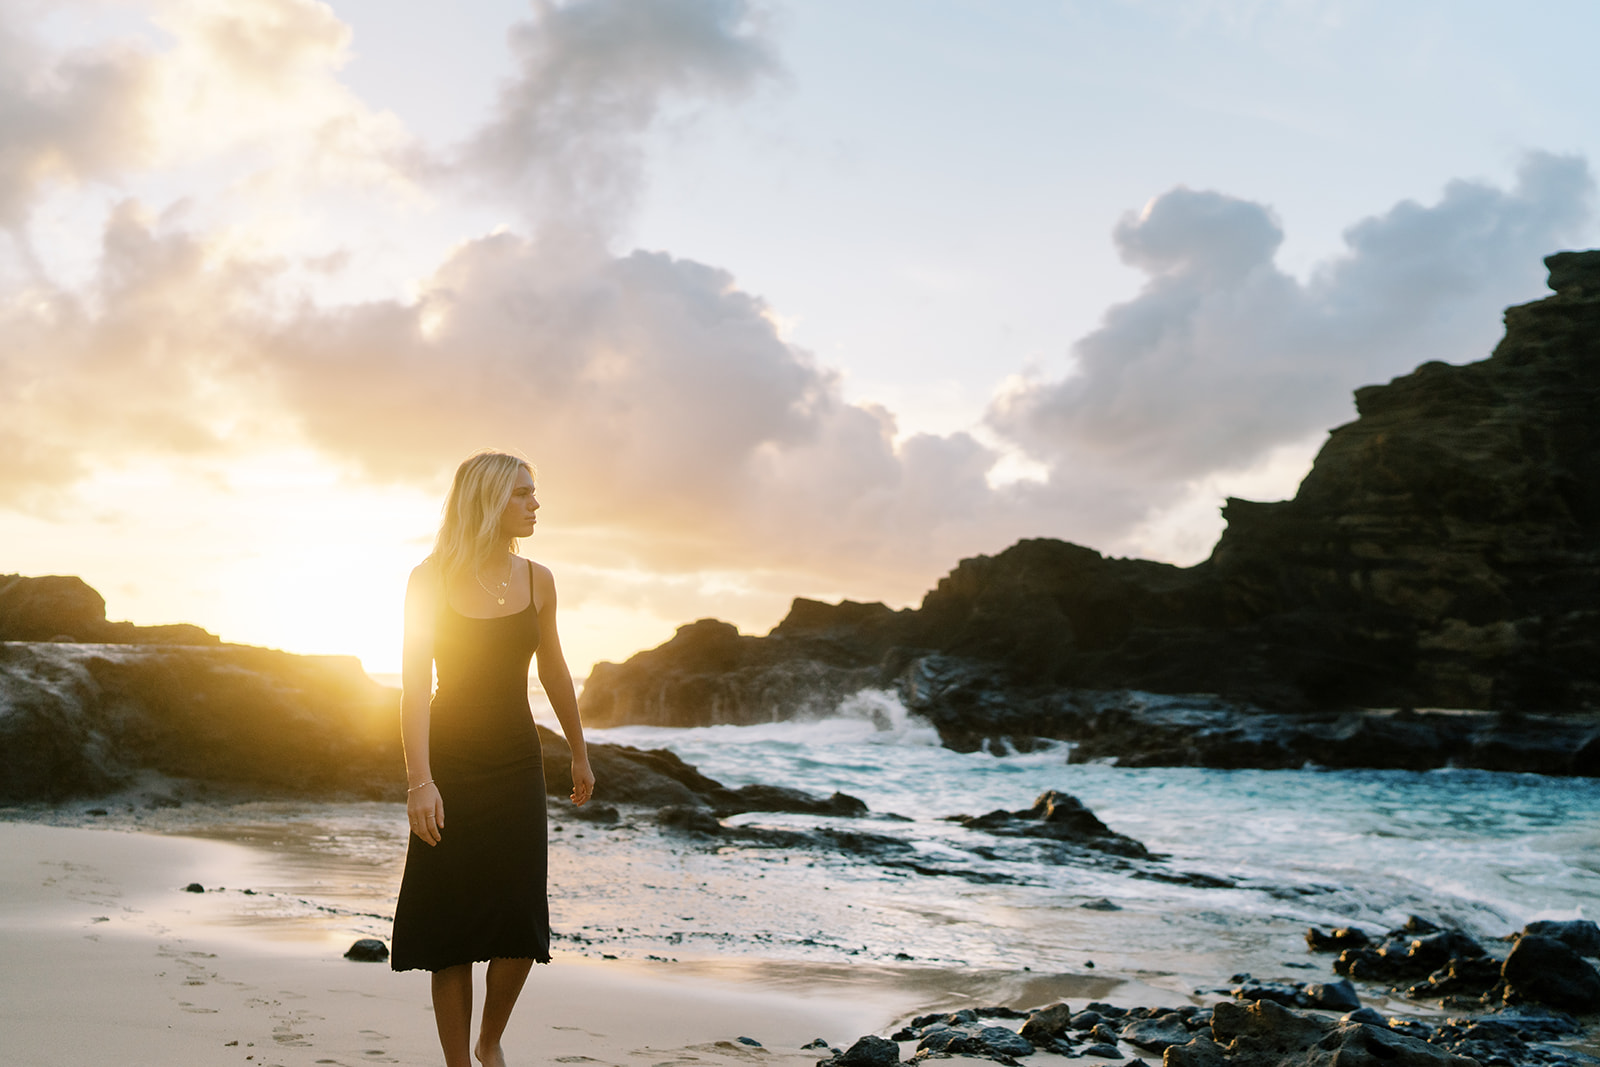 Woman standing on a beach at sunrise, with waves crashing on the shore and rocky cliffs senior portraits that go beyond 